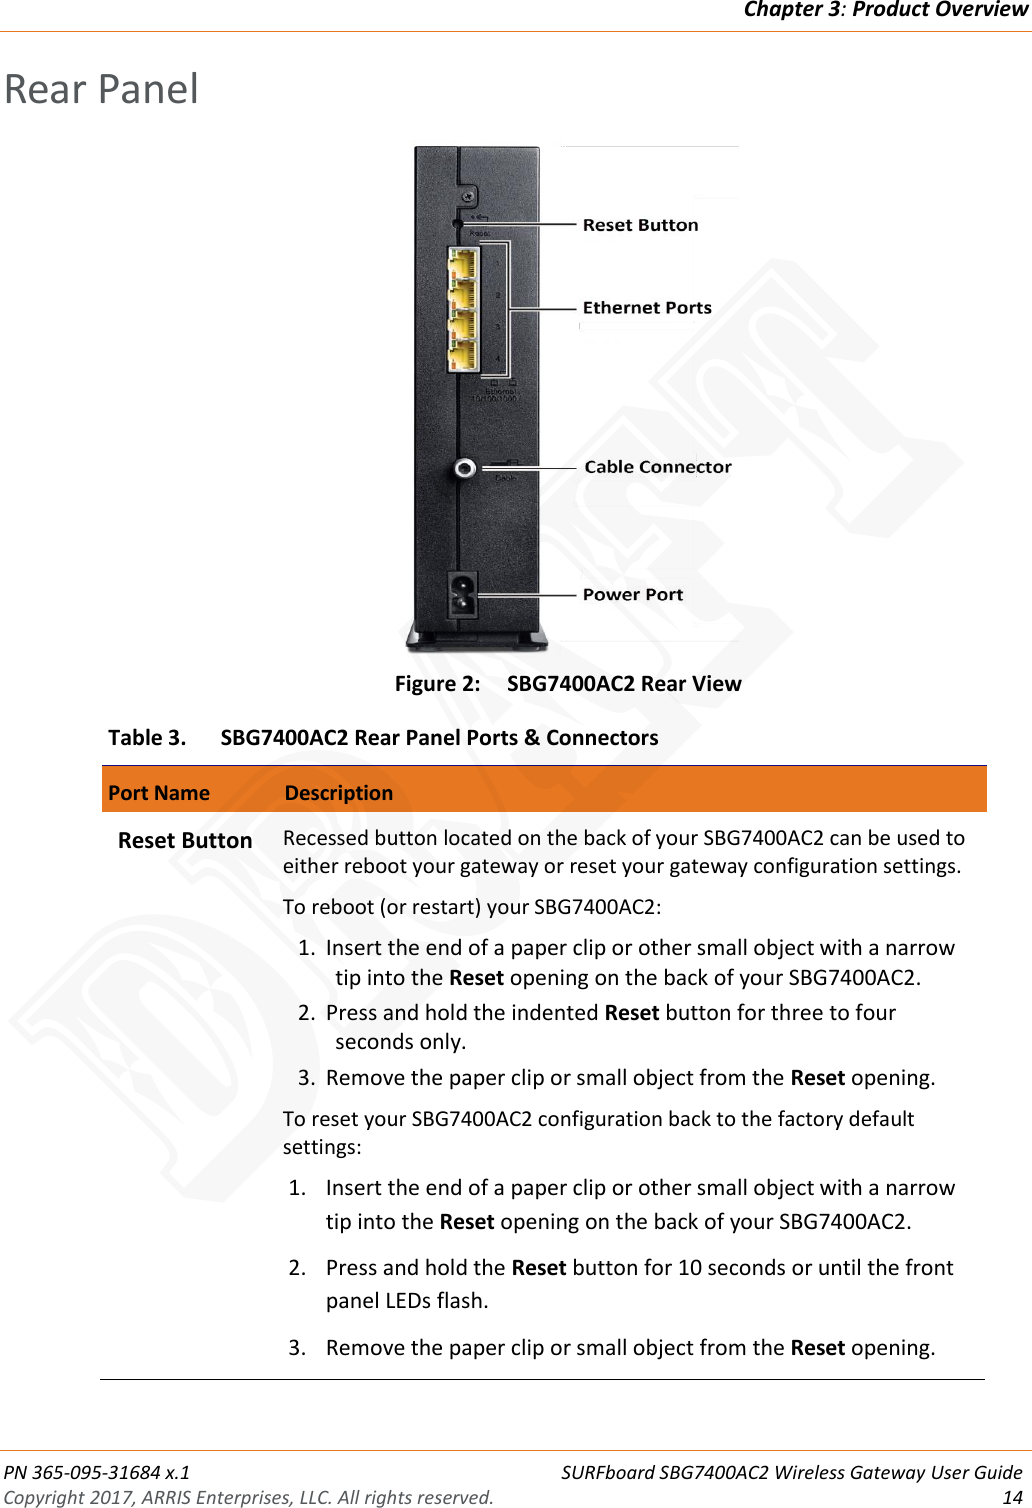 Chapter 3: Product Overview  PN 365-095-31684 x.1 SURFboard SBG7400AC2 Wireless Gateway User Guide Copyright 2017, ARRIS Enterprises, LLC. All rights reserved. 14  Rear Panel  Figure 2: SBG7400AC2 Rear View Table 3. SBG7400AC2 Rear Panel Ports &amp; Connectors  Port Name  Description         Blinking On (Solid)  Reset Button Recessed button located on the back of your SBG7400AC2 can be used to either reboot your gateway or reset your gateway configuration settings. To reboot (or restart) your SBG7400AC2: 1. Insert the end of a paper clip or other small object with a narrow tip into the Reset opening on the back of your SBG7400AC2. 2. Press and hold the indented Reset button for three to four seconds only. 3. Remove the paper clip or small object from the Reset opening.  To reset your SBG7400AC2 configuration back to the factory default settings: 1. Insert the end of a paper clip or other small object with a narrow tip into the Reset opening on the back of your SBG7400AC2. 2. Press and hold the Reset button for 10 seconds or until the front panel LEDs flash.  3. Remove the paper clip or small object from the Reset opening.  DRAFT